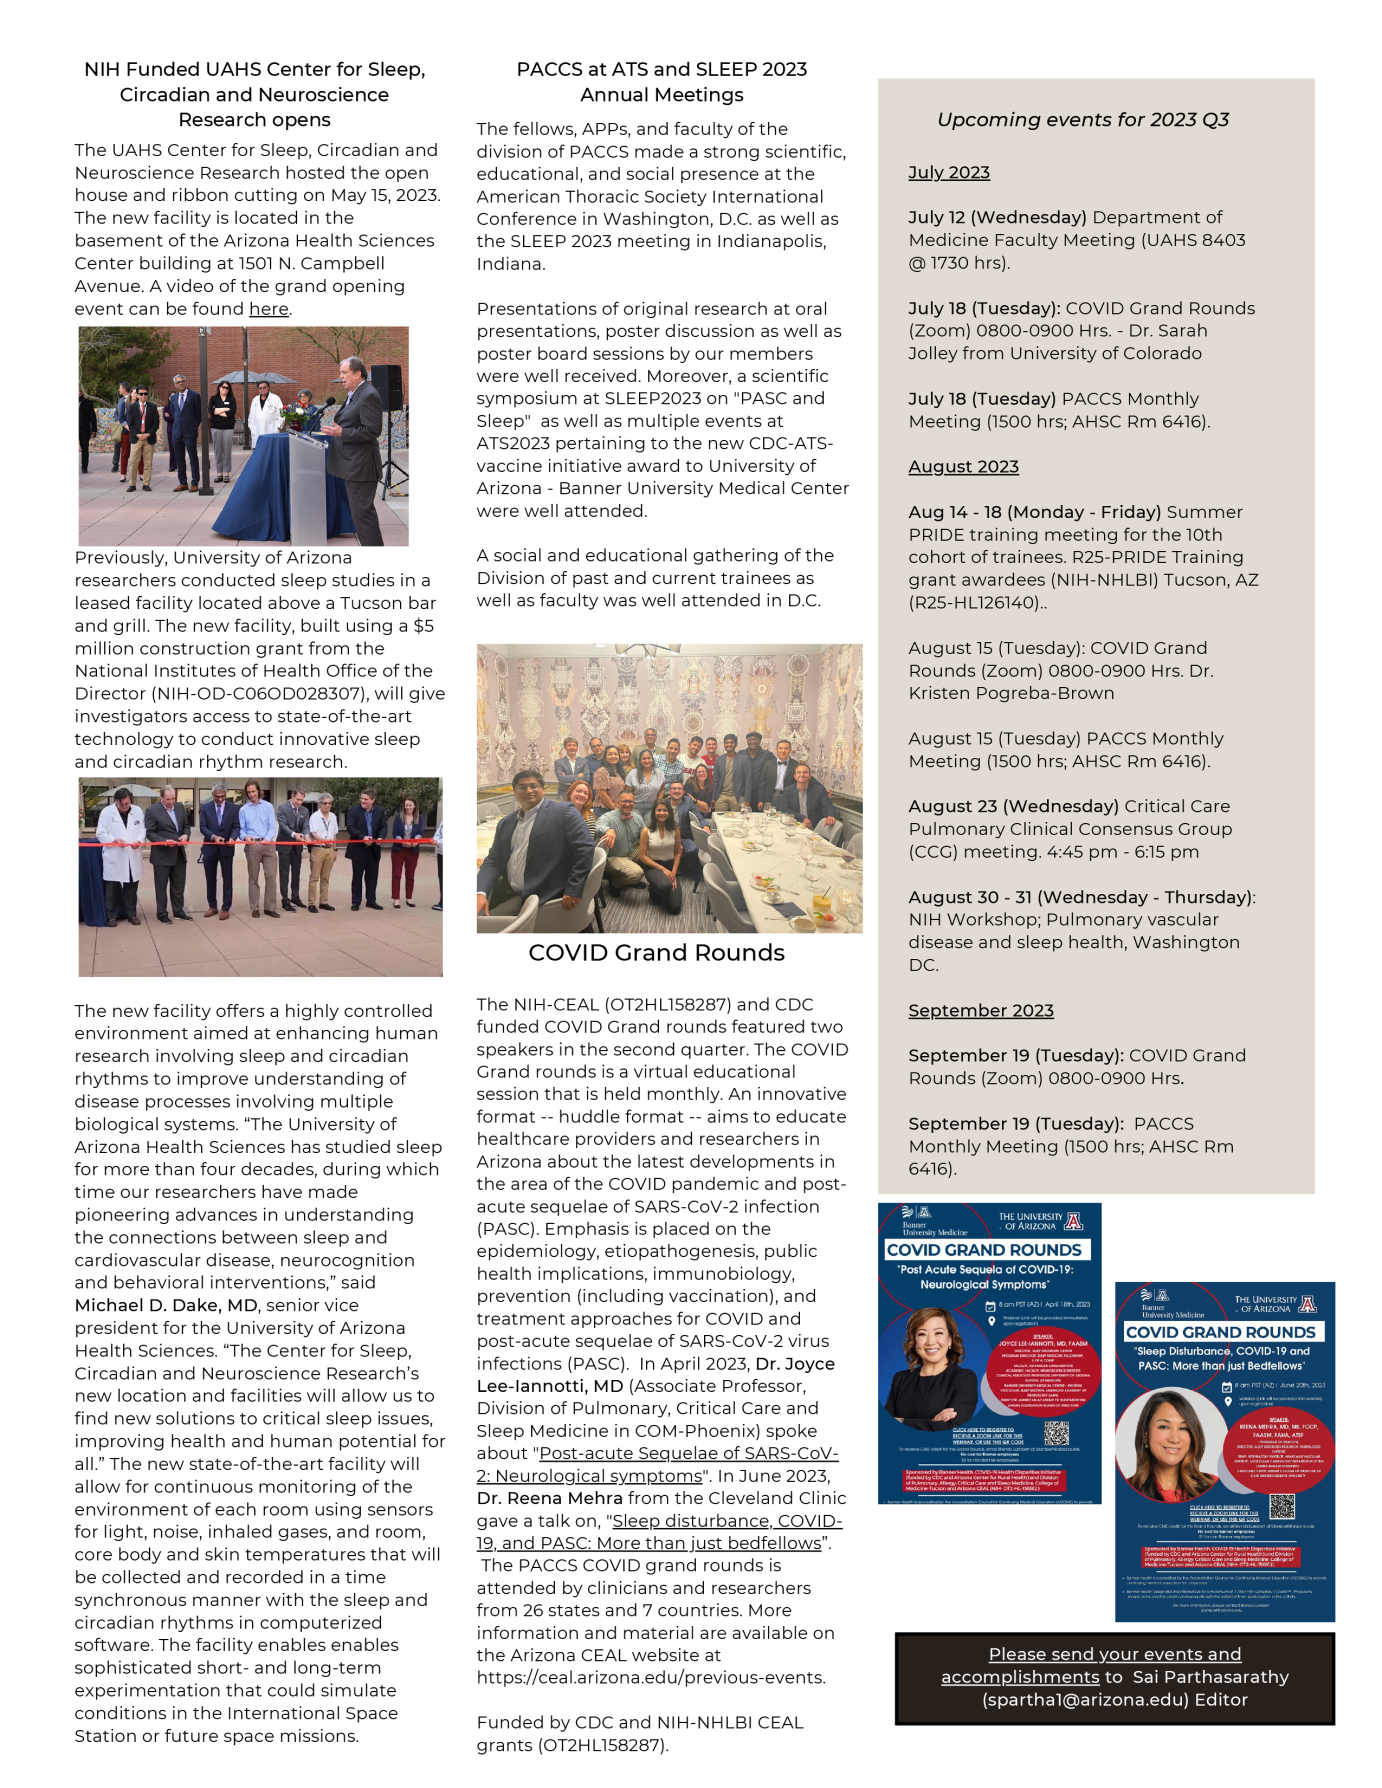 Page 4 of April-June 2023 PACCS Newsletter